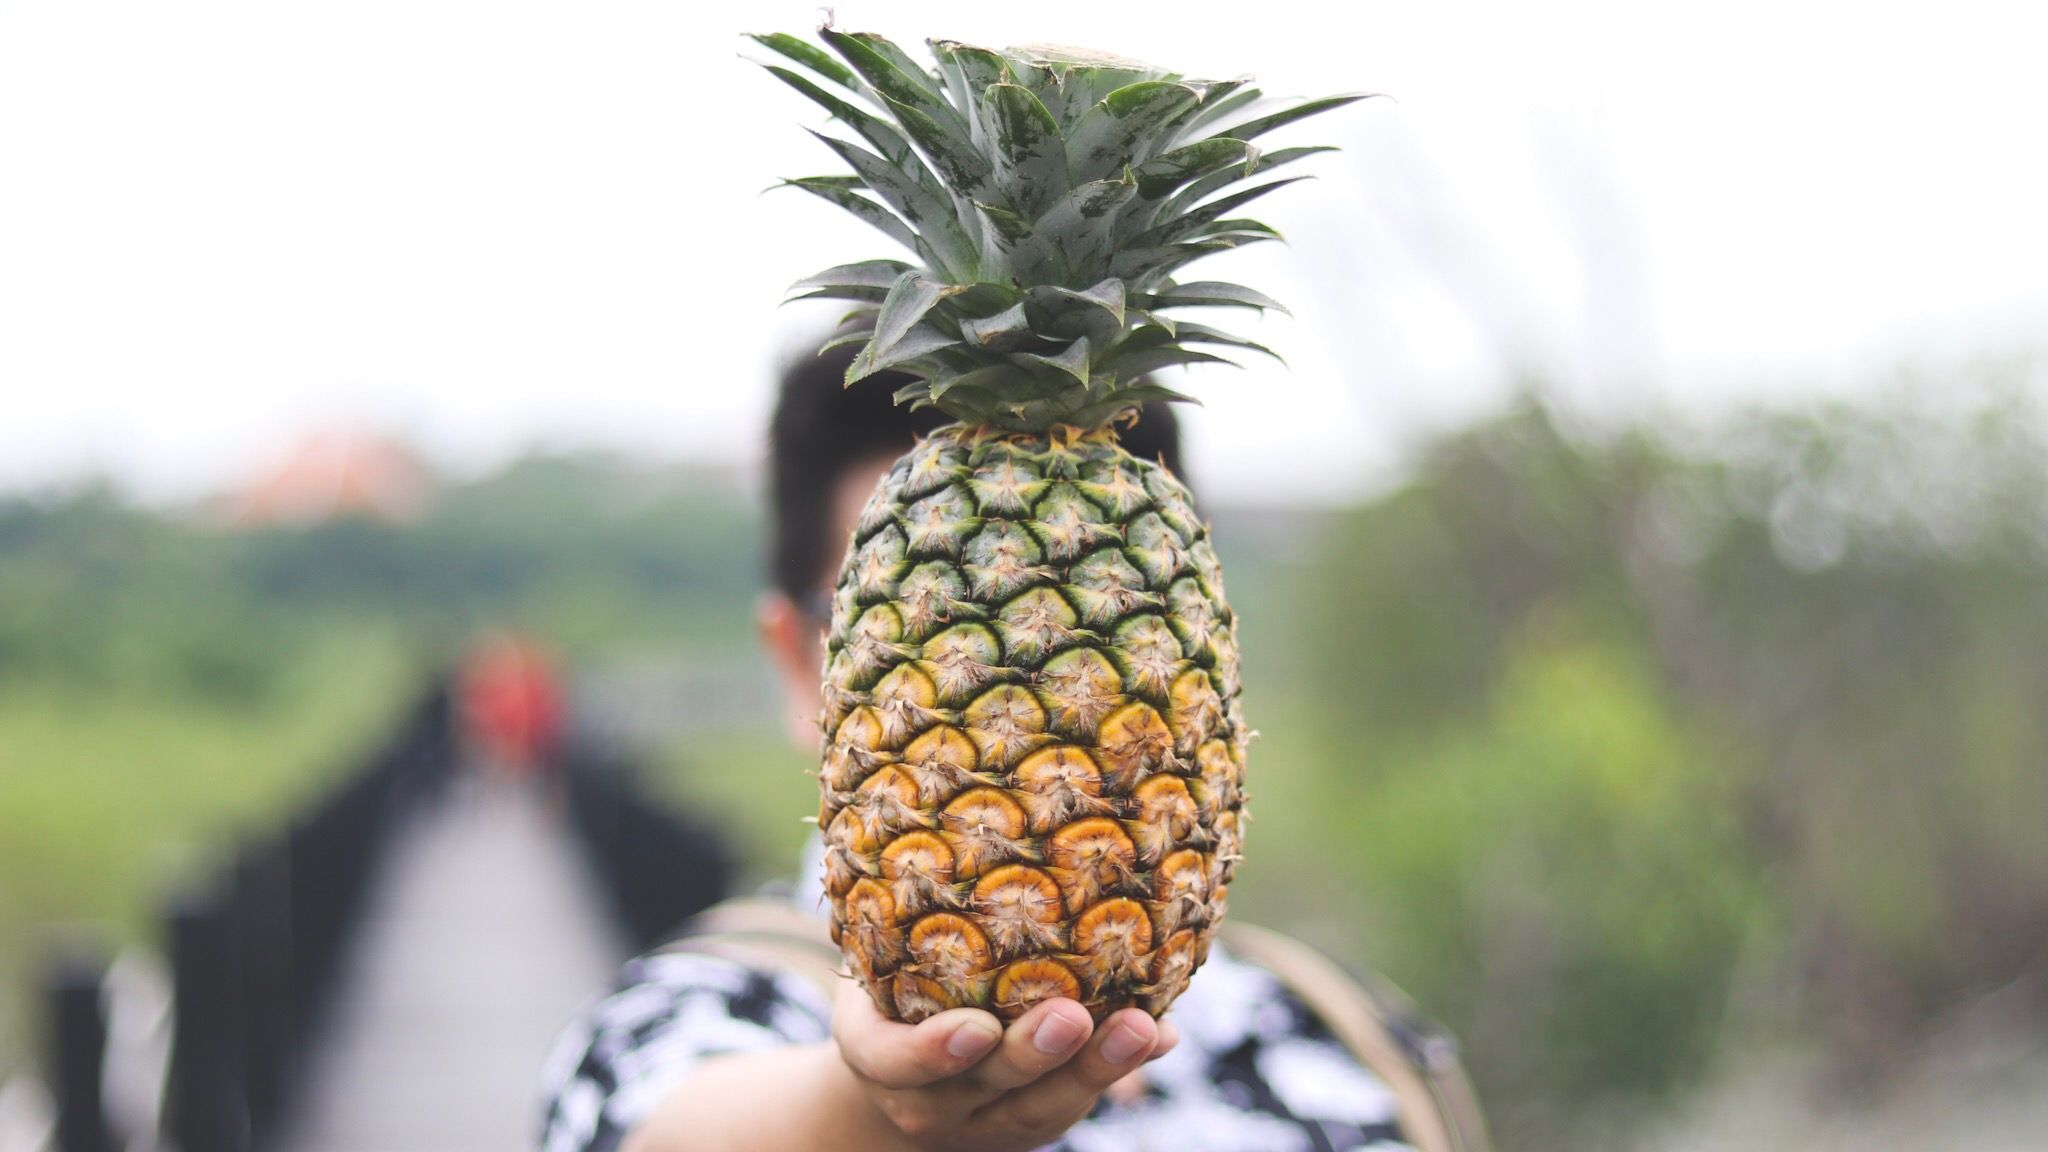 Pineapple Benefits: Health, Nutrition, and More